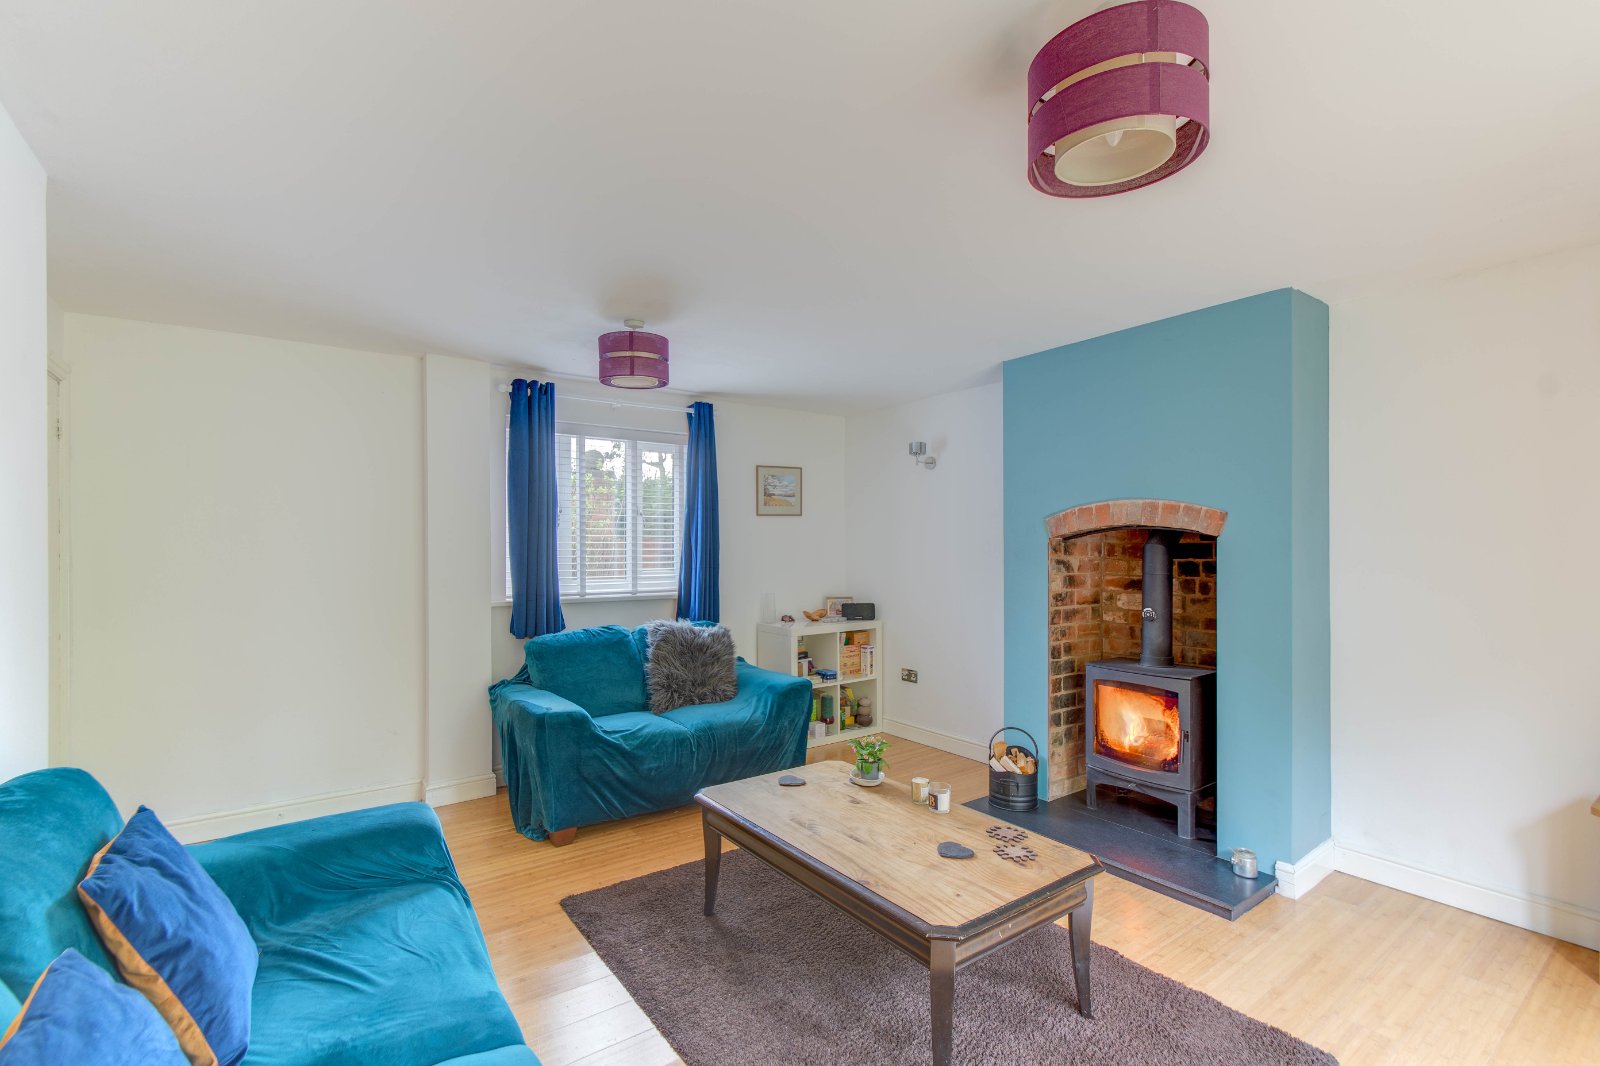 4 bed  for sale in Linthurst Road, Barnt Green  - Property Image 20